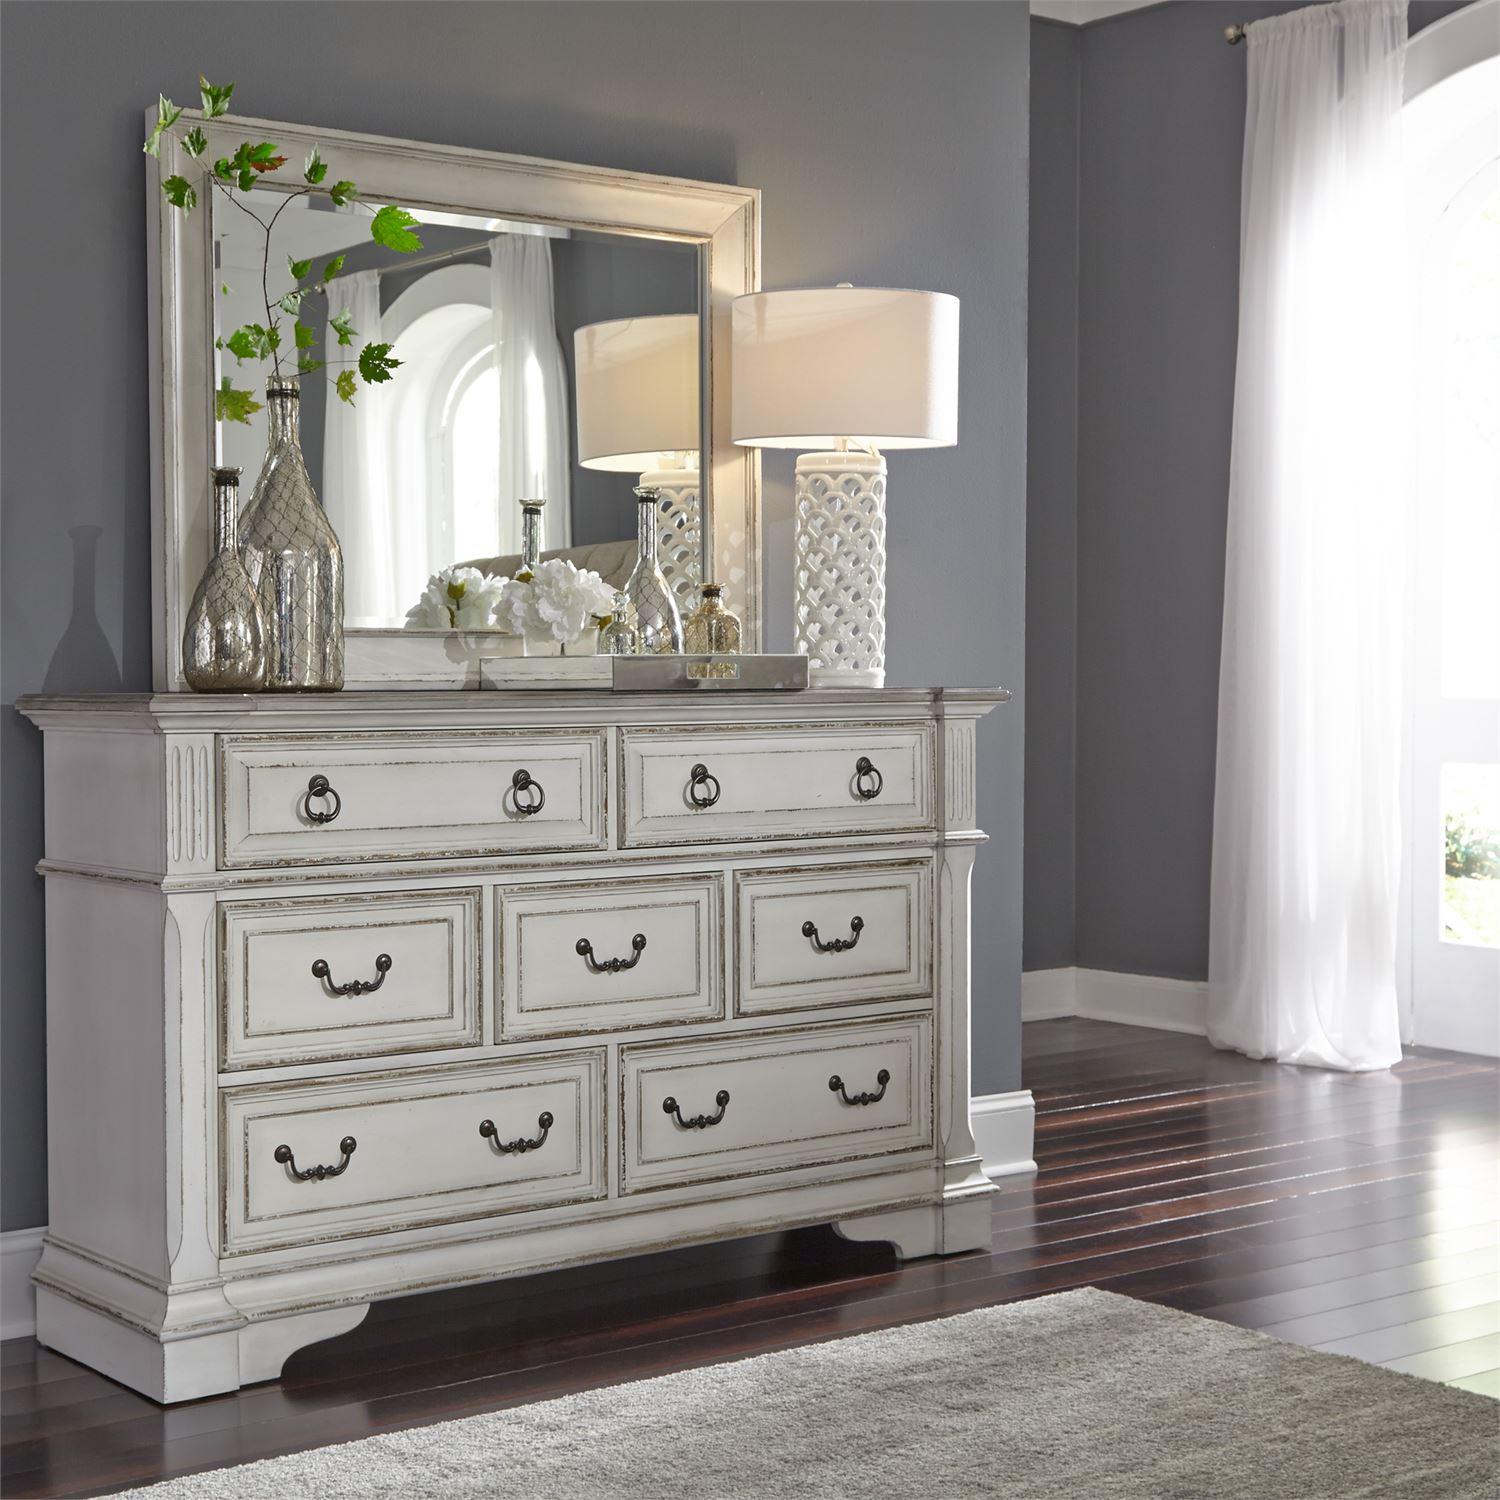 Traditional Dresser With Mirror Abbey Park  520-BR-DM 520-BR-DM in White 